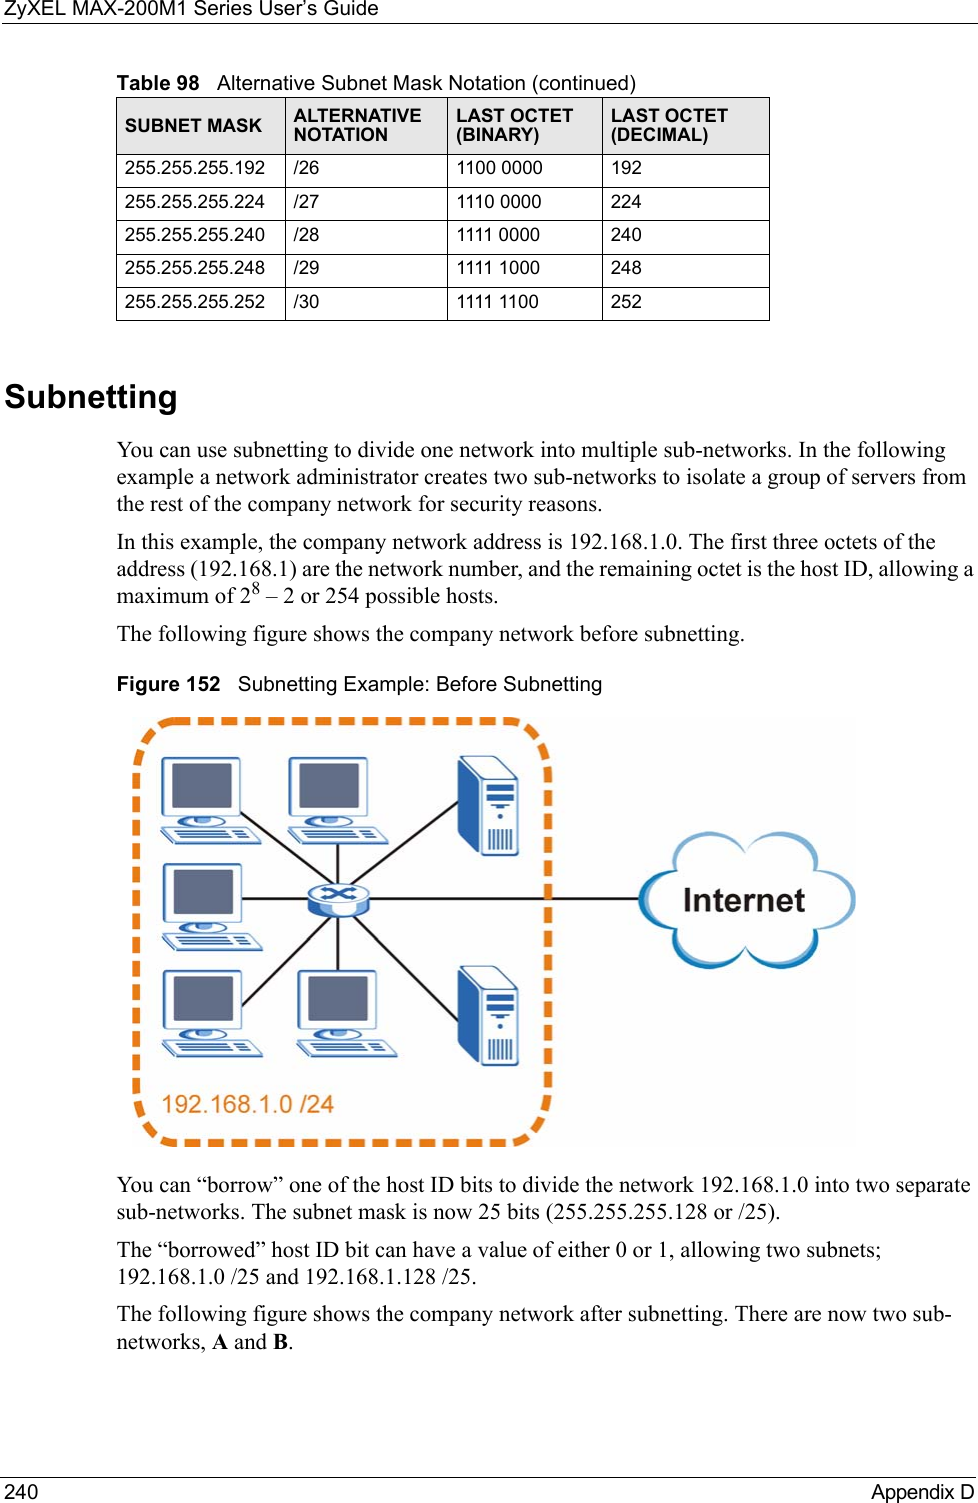 ZyXEL MAX-200M1 Series User’s Guide240 Appendix DSubnettingYou can use subnetting to divide one network into multiple sub-networks. In the following example a network administrator creates two sub-networks to isolate a group of servers from the rest of the company network for security reasons.In this example, the company network address is 192.168.1.0. The first three octets of the address (192.168.1) are the network number, and the remaining octet is the host ID, allowing a maximum of 28 – 2 or 254 possible hosts.The following figure shows the company network before subnetting.  Figure 152   Subnetting Example: Before SubnettingYou can “borrow” one of the host ID bits to divide the network 192.168.1.0 into two separate sub-networks. The subnet mask is now 25 bits (255.255.255.128 or /25).The “borrowed” host ID bit can have a value of either 0 or 1, allowing two subnets; 192.168.1.0 /25 and 192.168.1.128 /25. The following figure shows the company network after subnetting. There are now two sub-networks, A and B. 255.255.255.192 /26 1100 0000 192255.255.255.224 /27 1110 0000 224255.255.255.240 /28 1111 0000 240255.255.255.248 /29 1111 1000 248255.255.255.252 /30 1111 1100 252Table 98   Alternative Subnet Mask Notation (continued)SUBNET MASK ALTERNATIVE NOTATIONLAST OCTET (BINARY)LAST OCTET (DECIMAL)